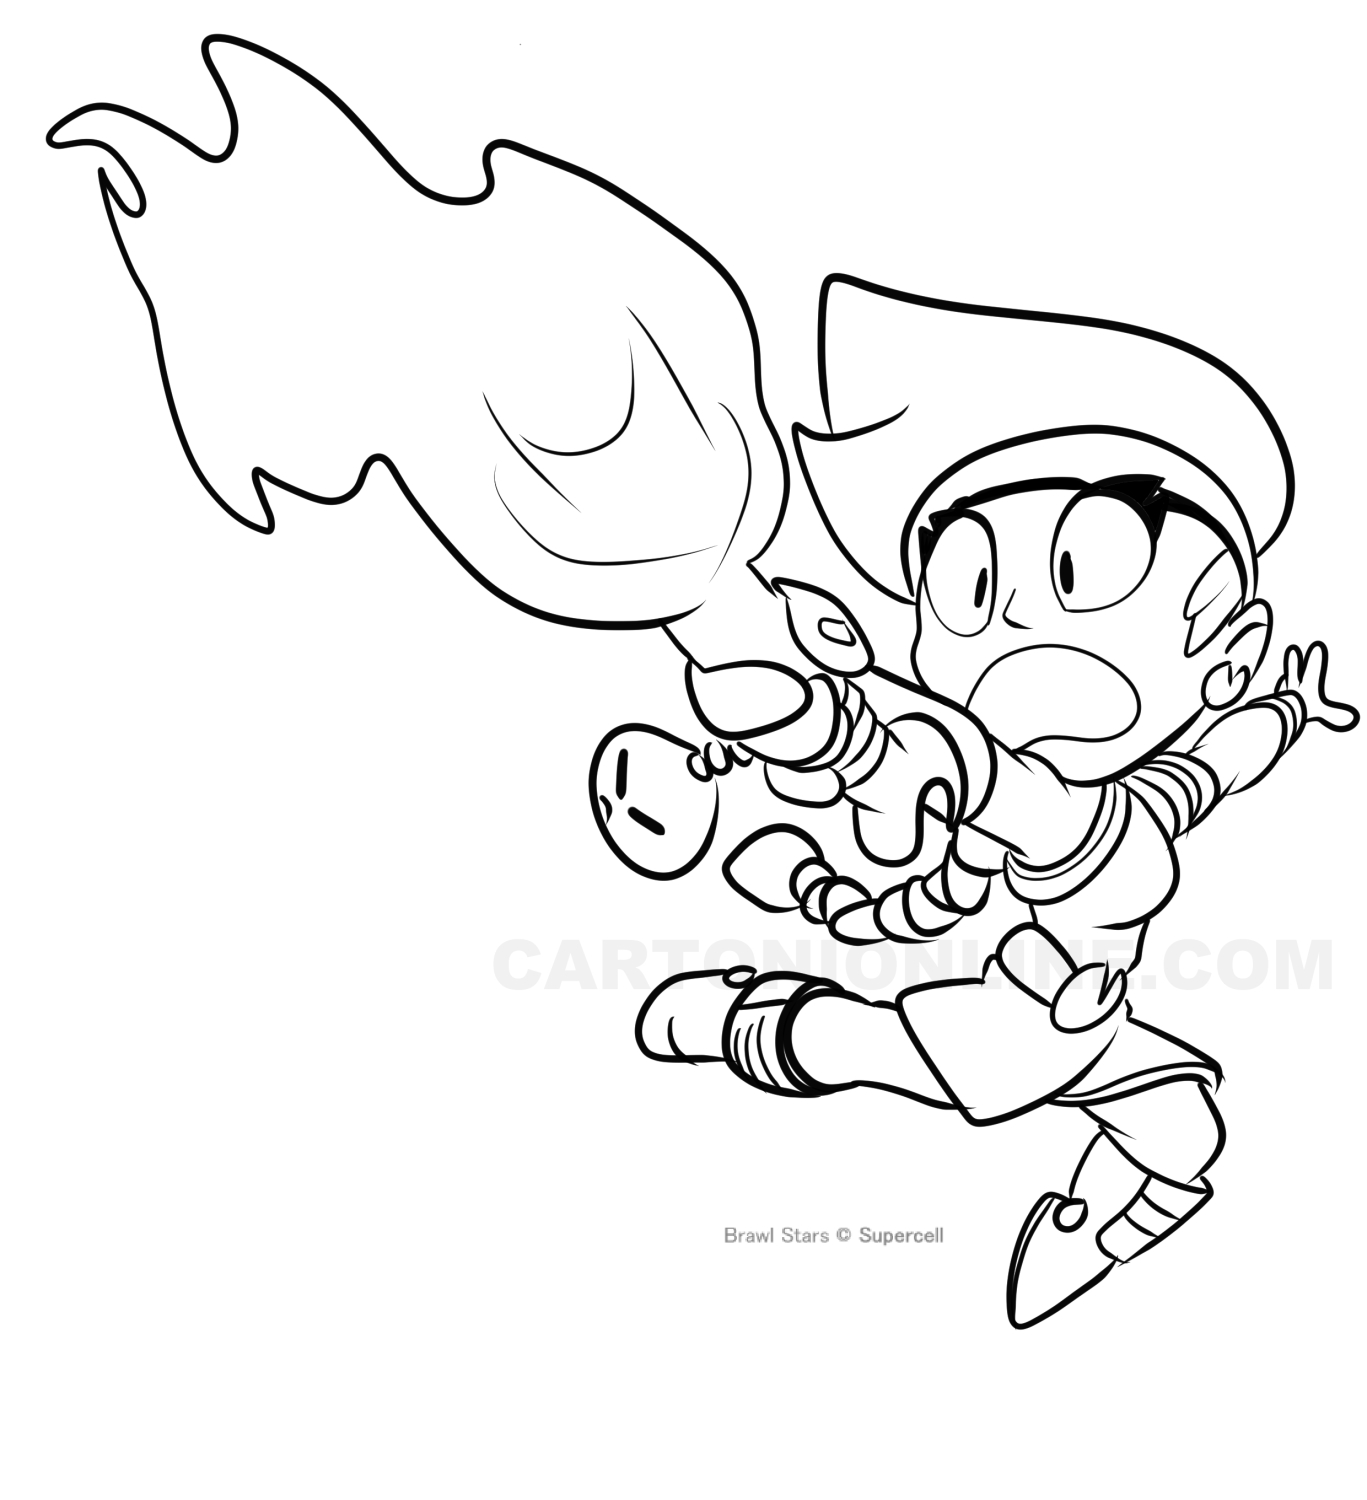 Amber 02 from Brawl Stars coloring page to print and coloring